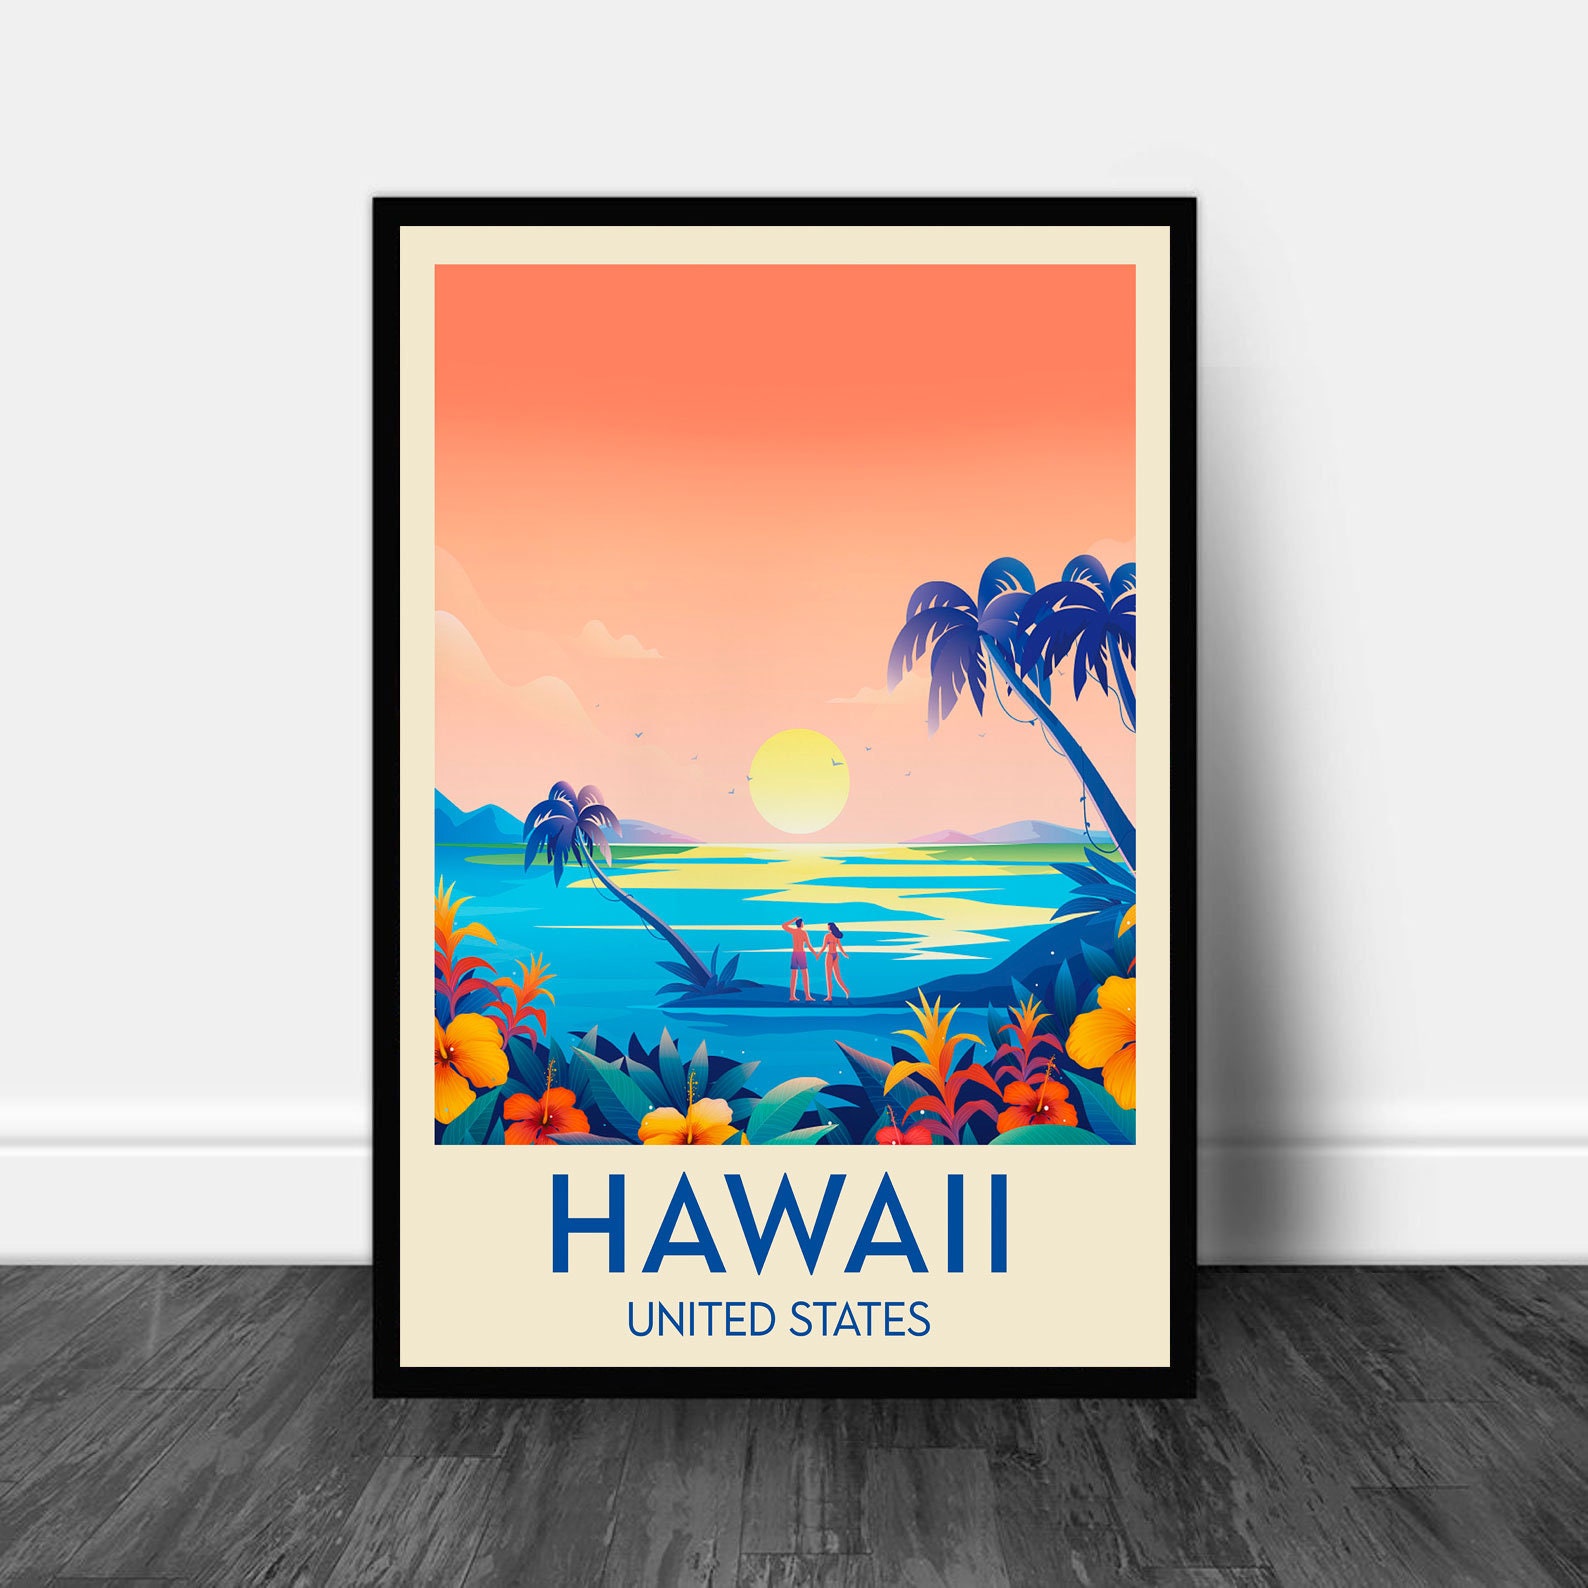 Hawaii Travel Poster Hawaii Surfing Vintage Travel Poster | Etsy